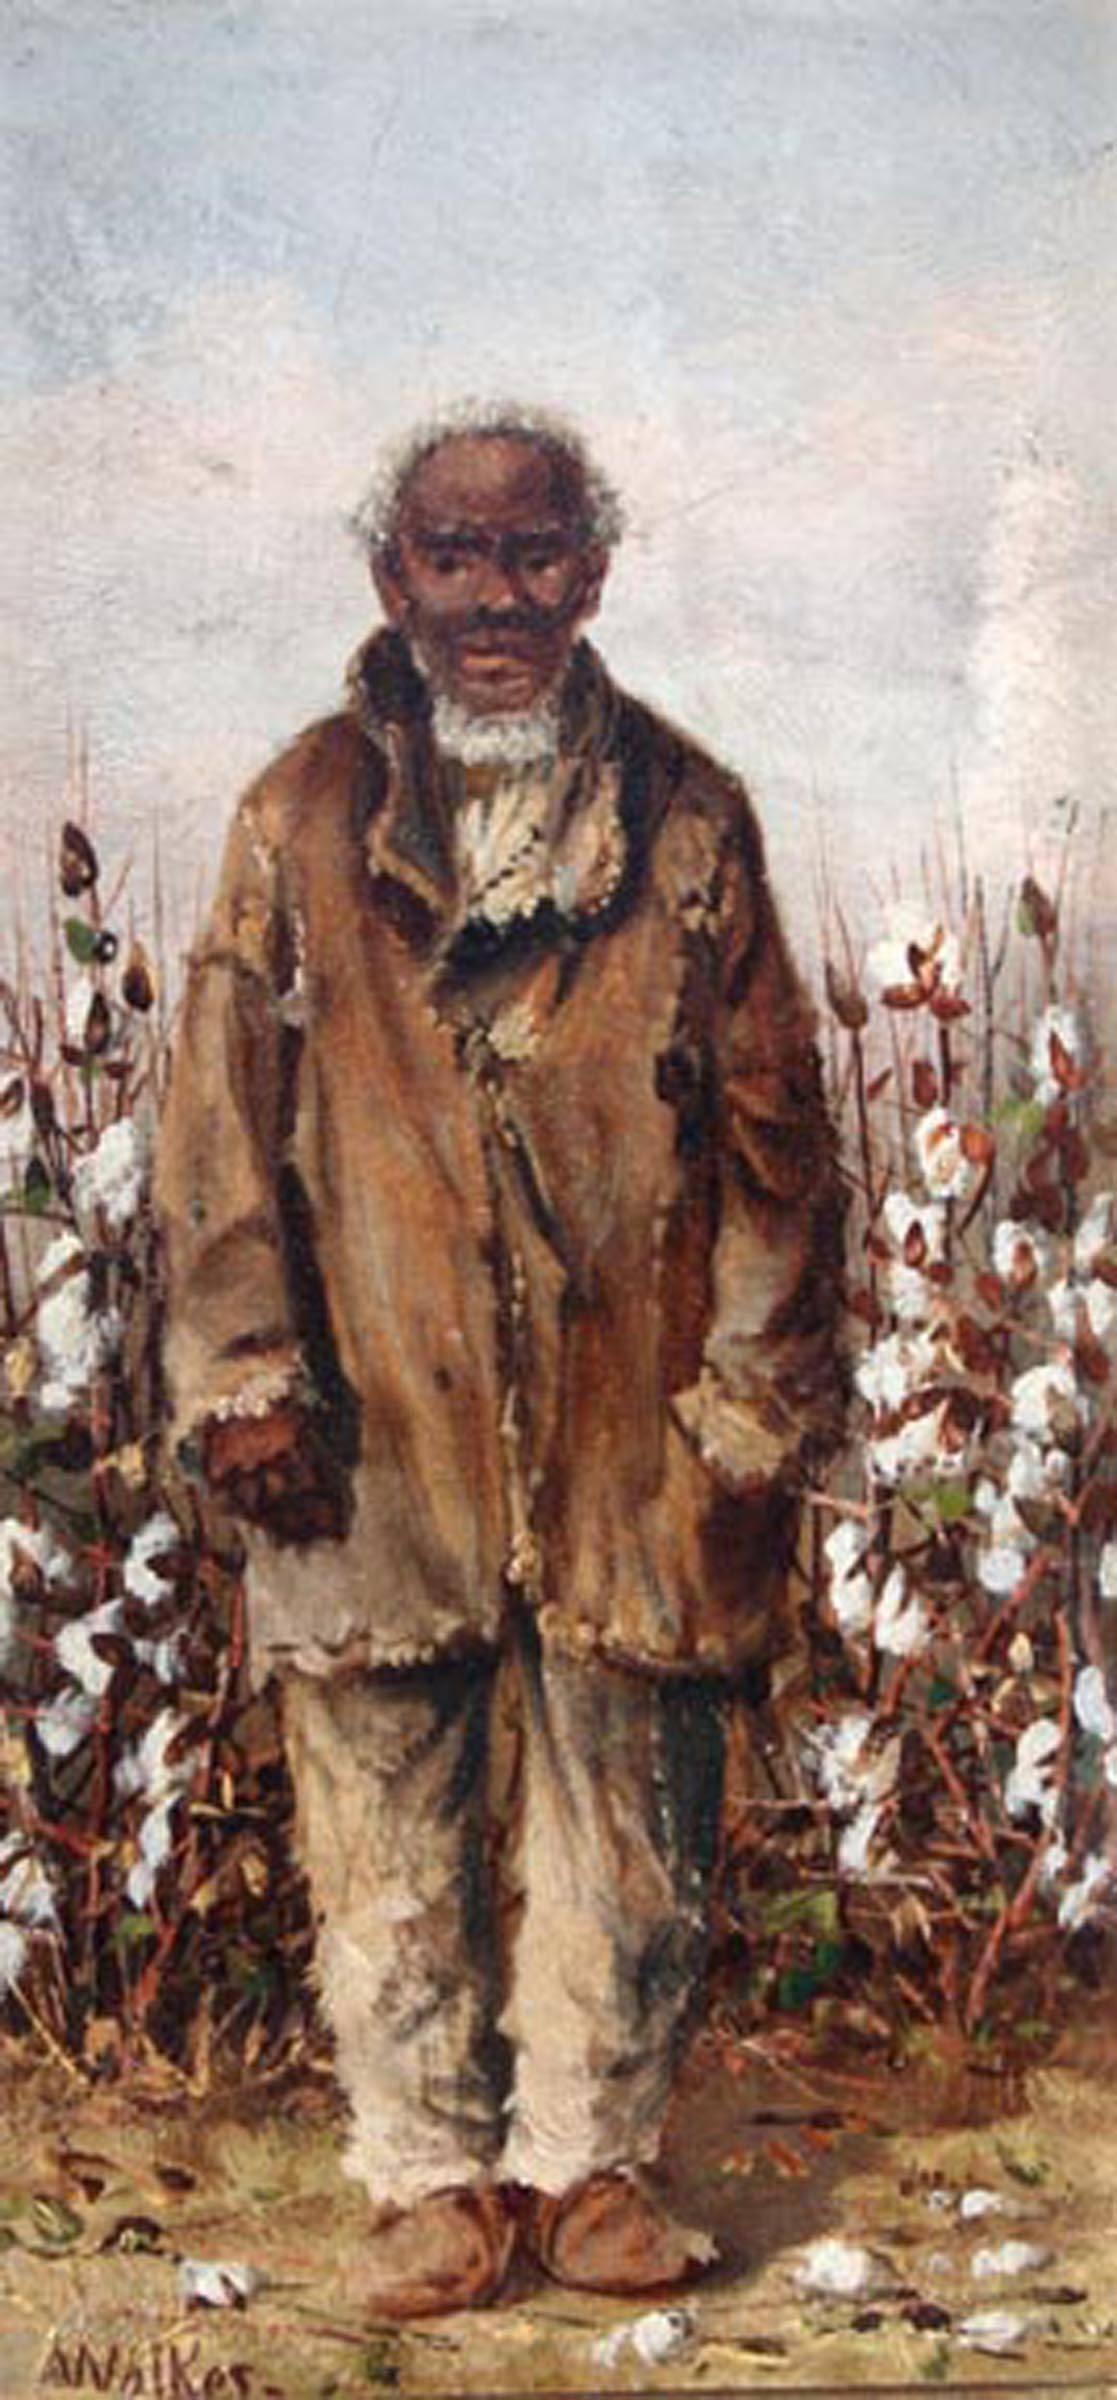 William Aiken Walker (American, b. c.1838-1921).

Man in a cottonfield.

Oil on board, signed lower left.

Painting size: 8.25” x 4.25”.
Frame size: 12.5” x 8.5”.

A lifelong artist, Walker exhibited his first painting at the age of twelve